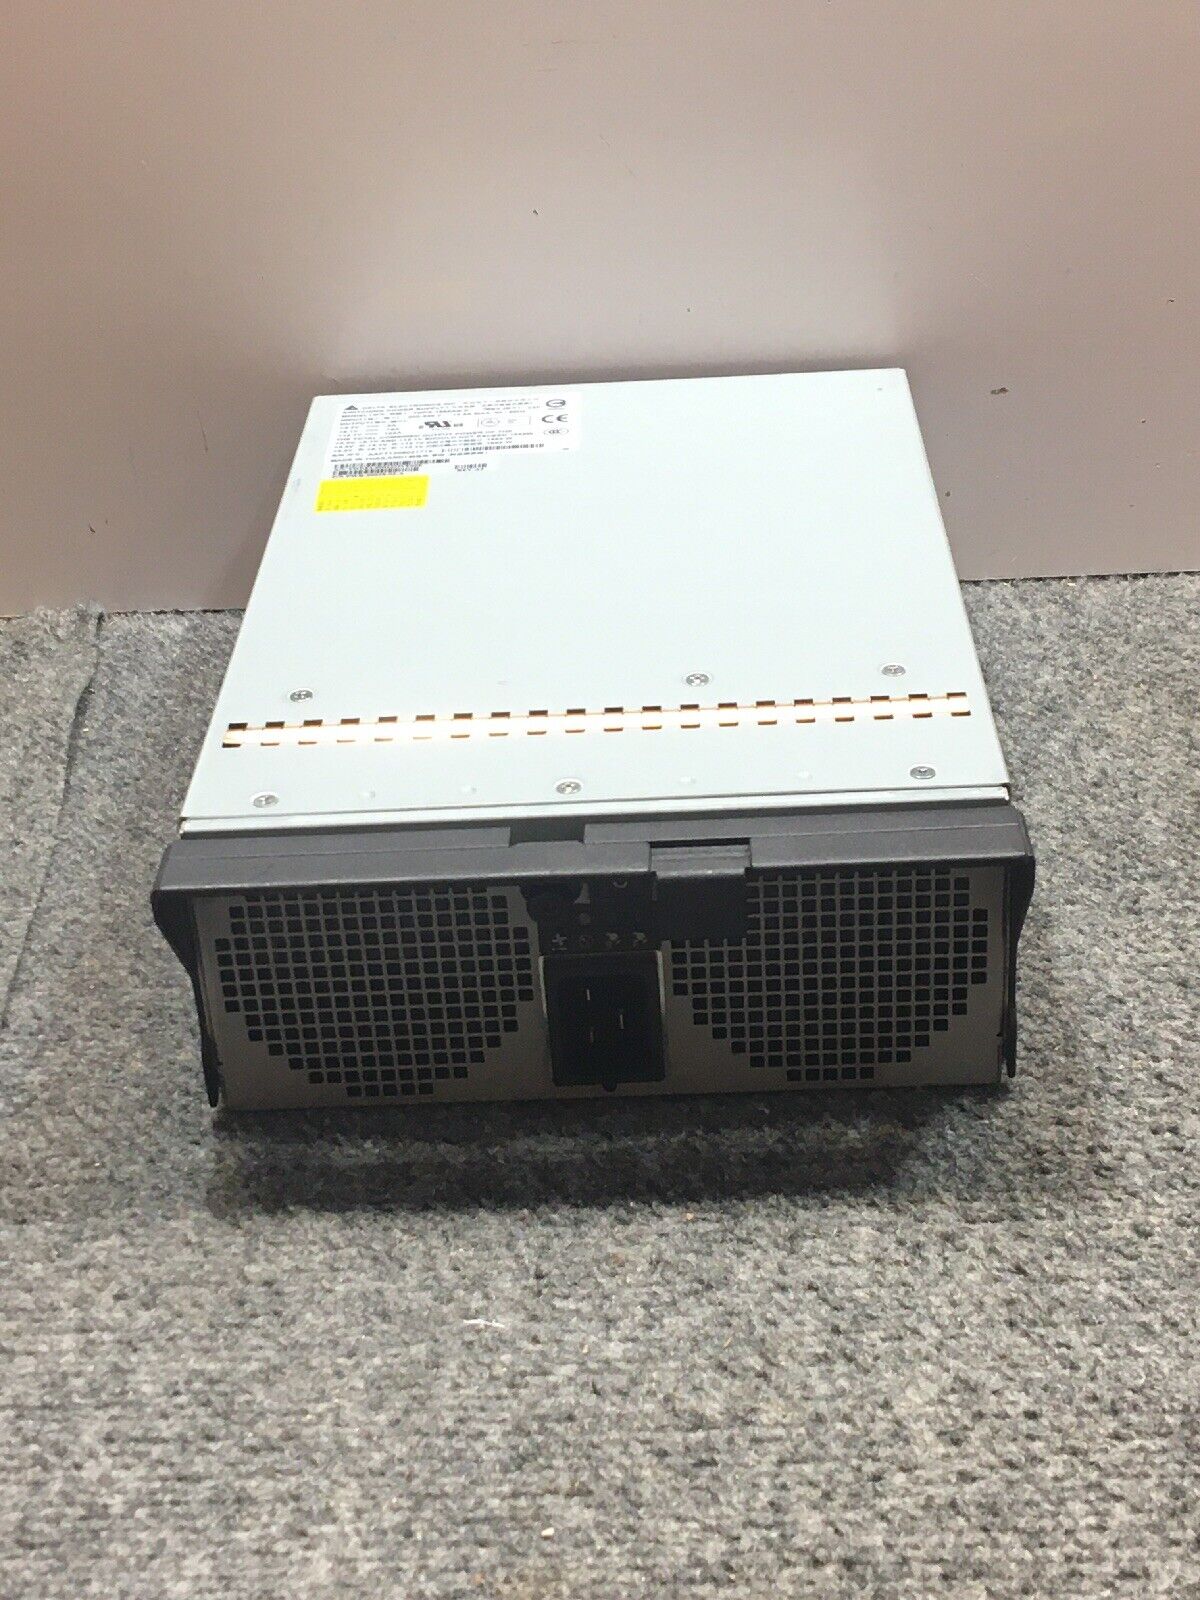 TDPS-1865AB DELTA ELECTRONICS A 1865W 200-240V SWITCHING POWER SUPPLY UNIT